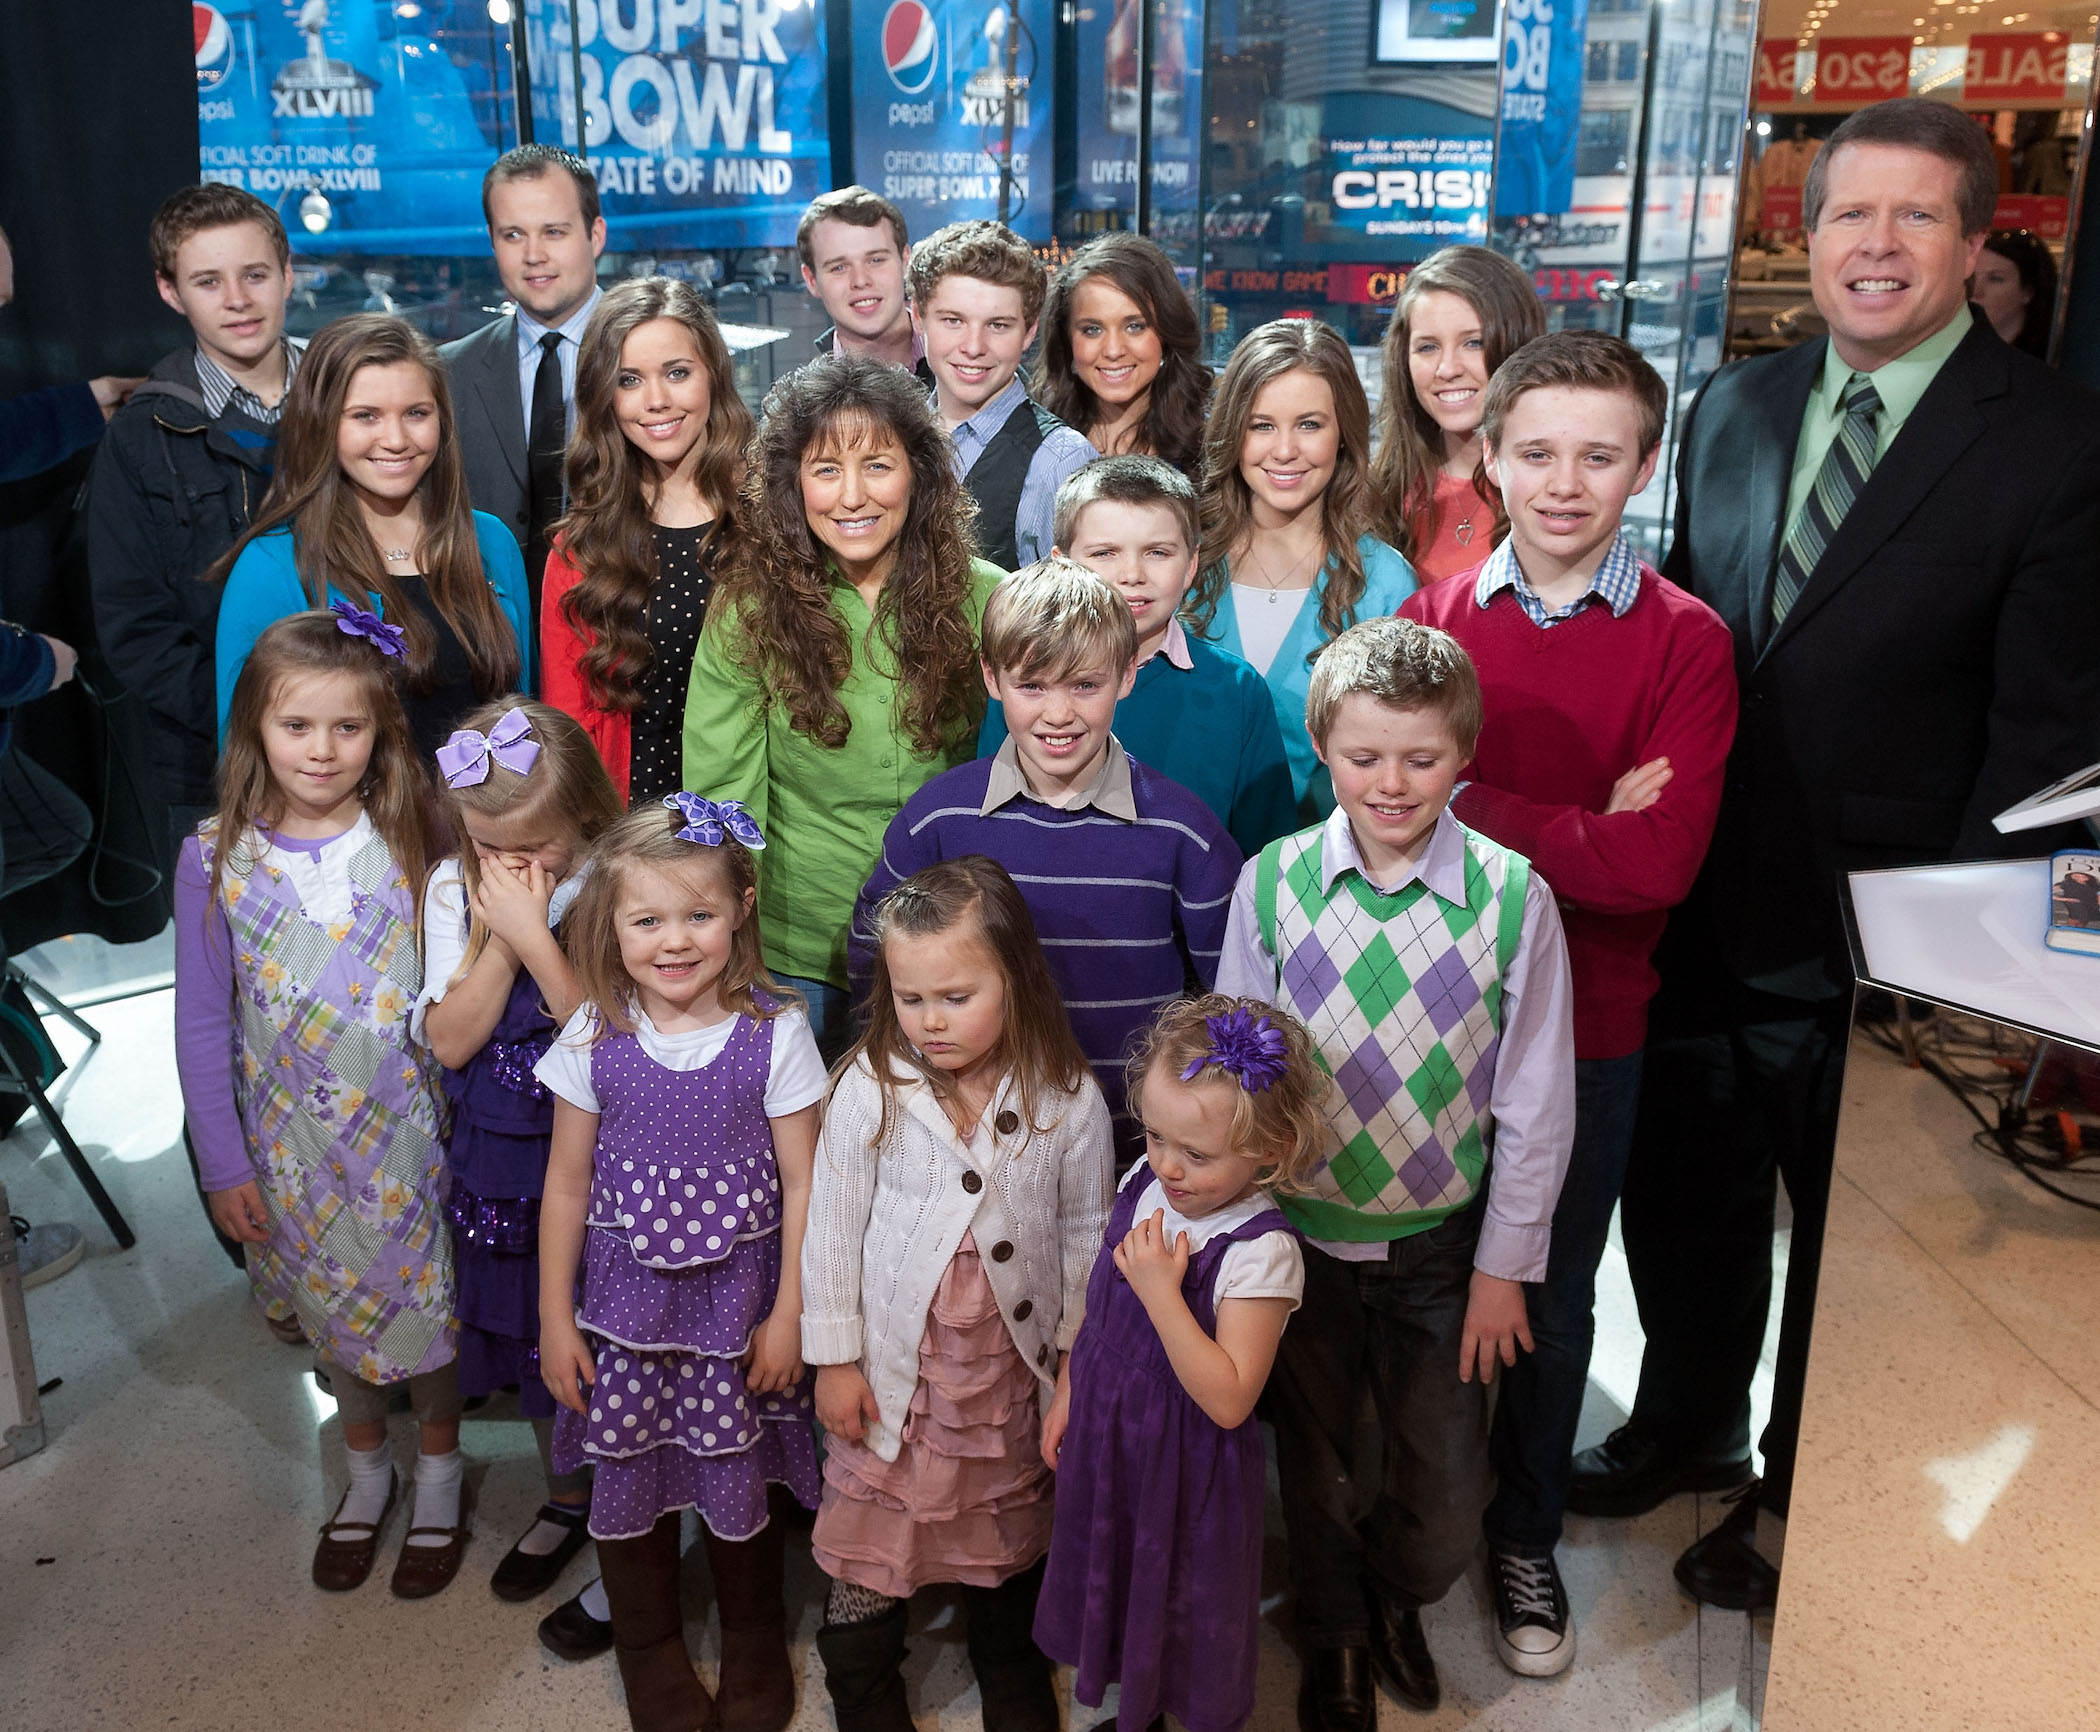 The Duggar family from TLC's 'Counting On' standing together while looking up at the camera and smiling on the set of 'Extra'